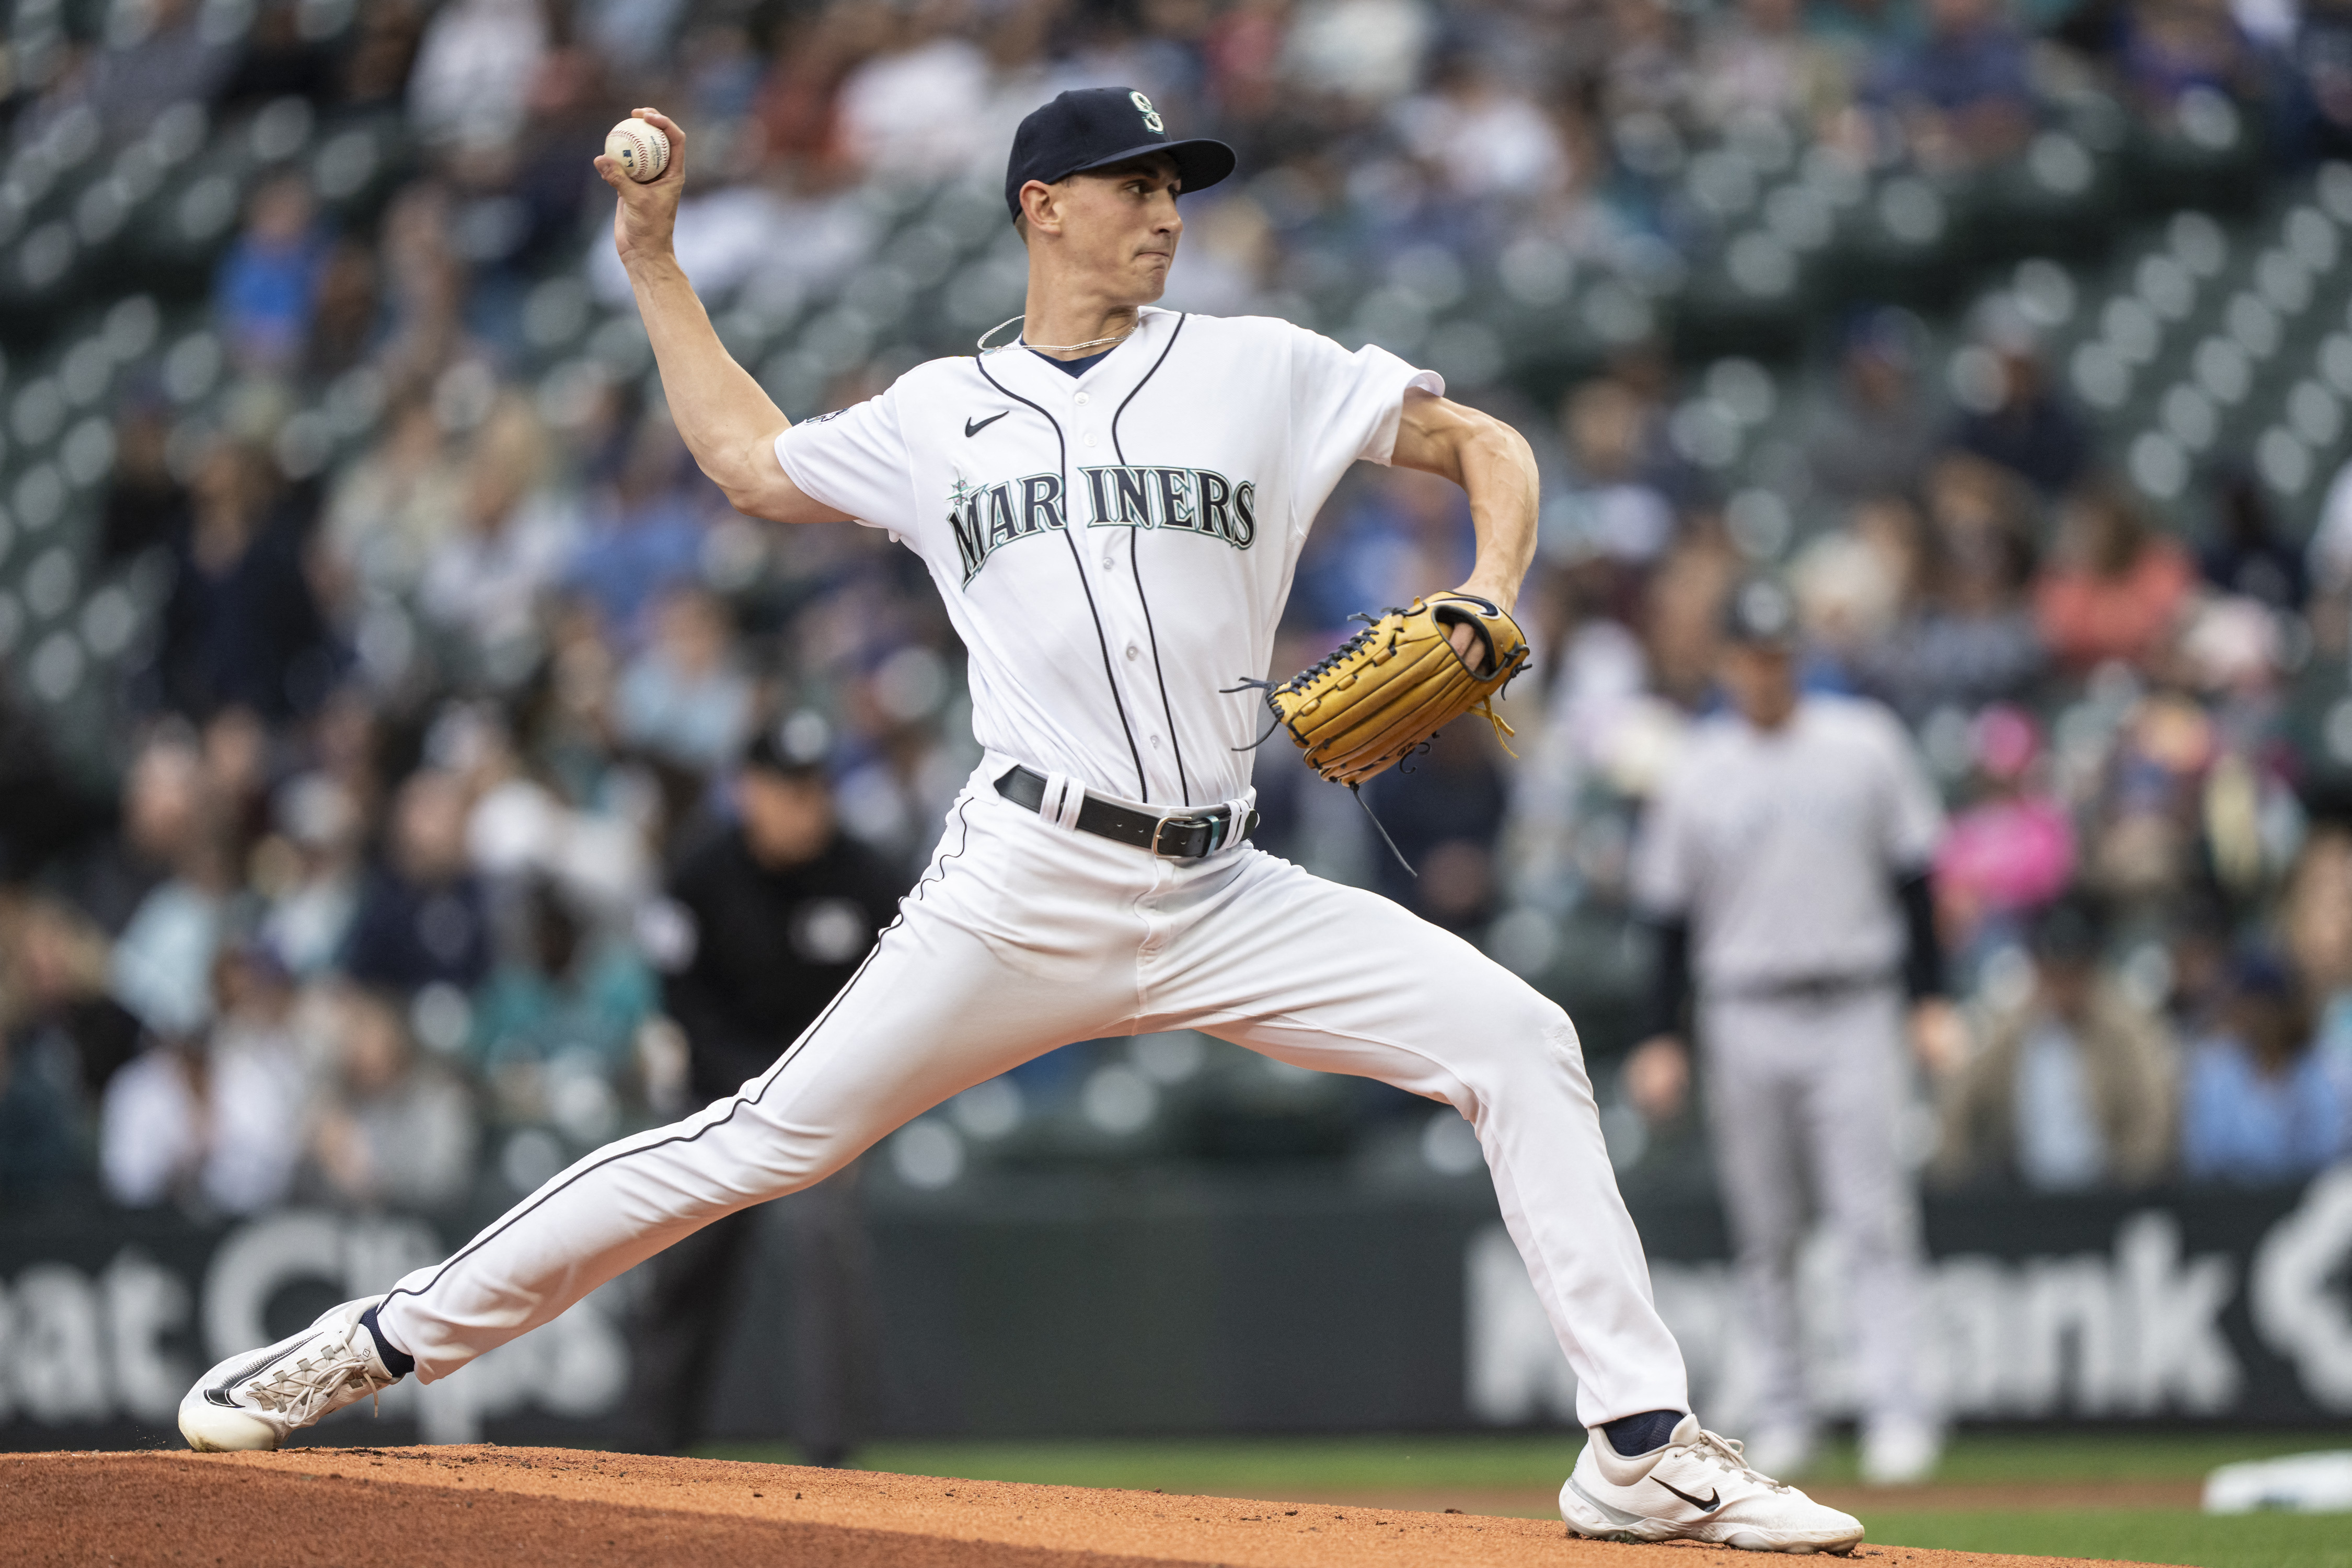 Cal Raleigh's RBI single in 10th inning gives Mariners 1-0 win